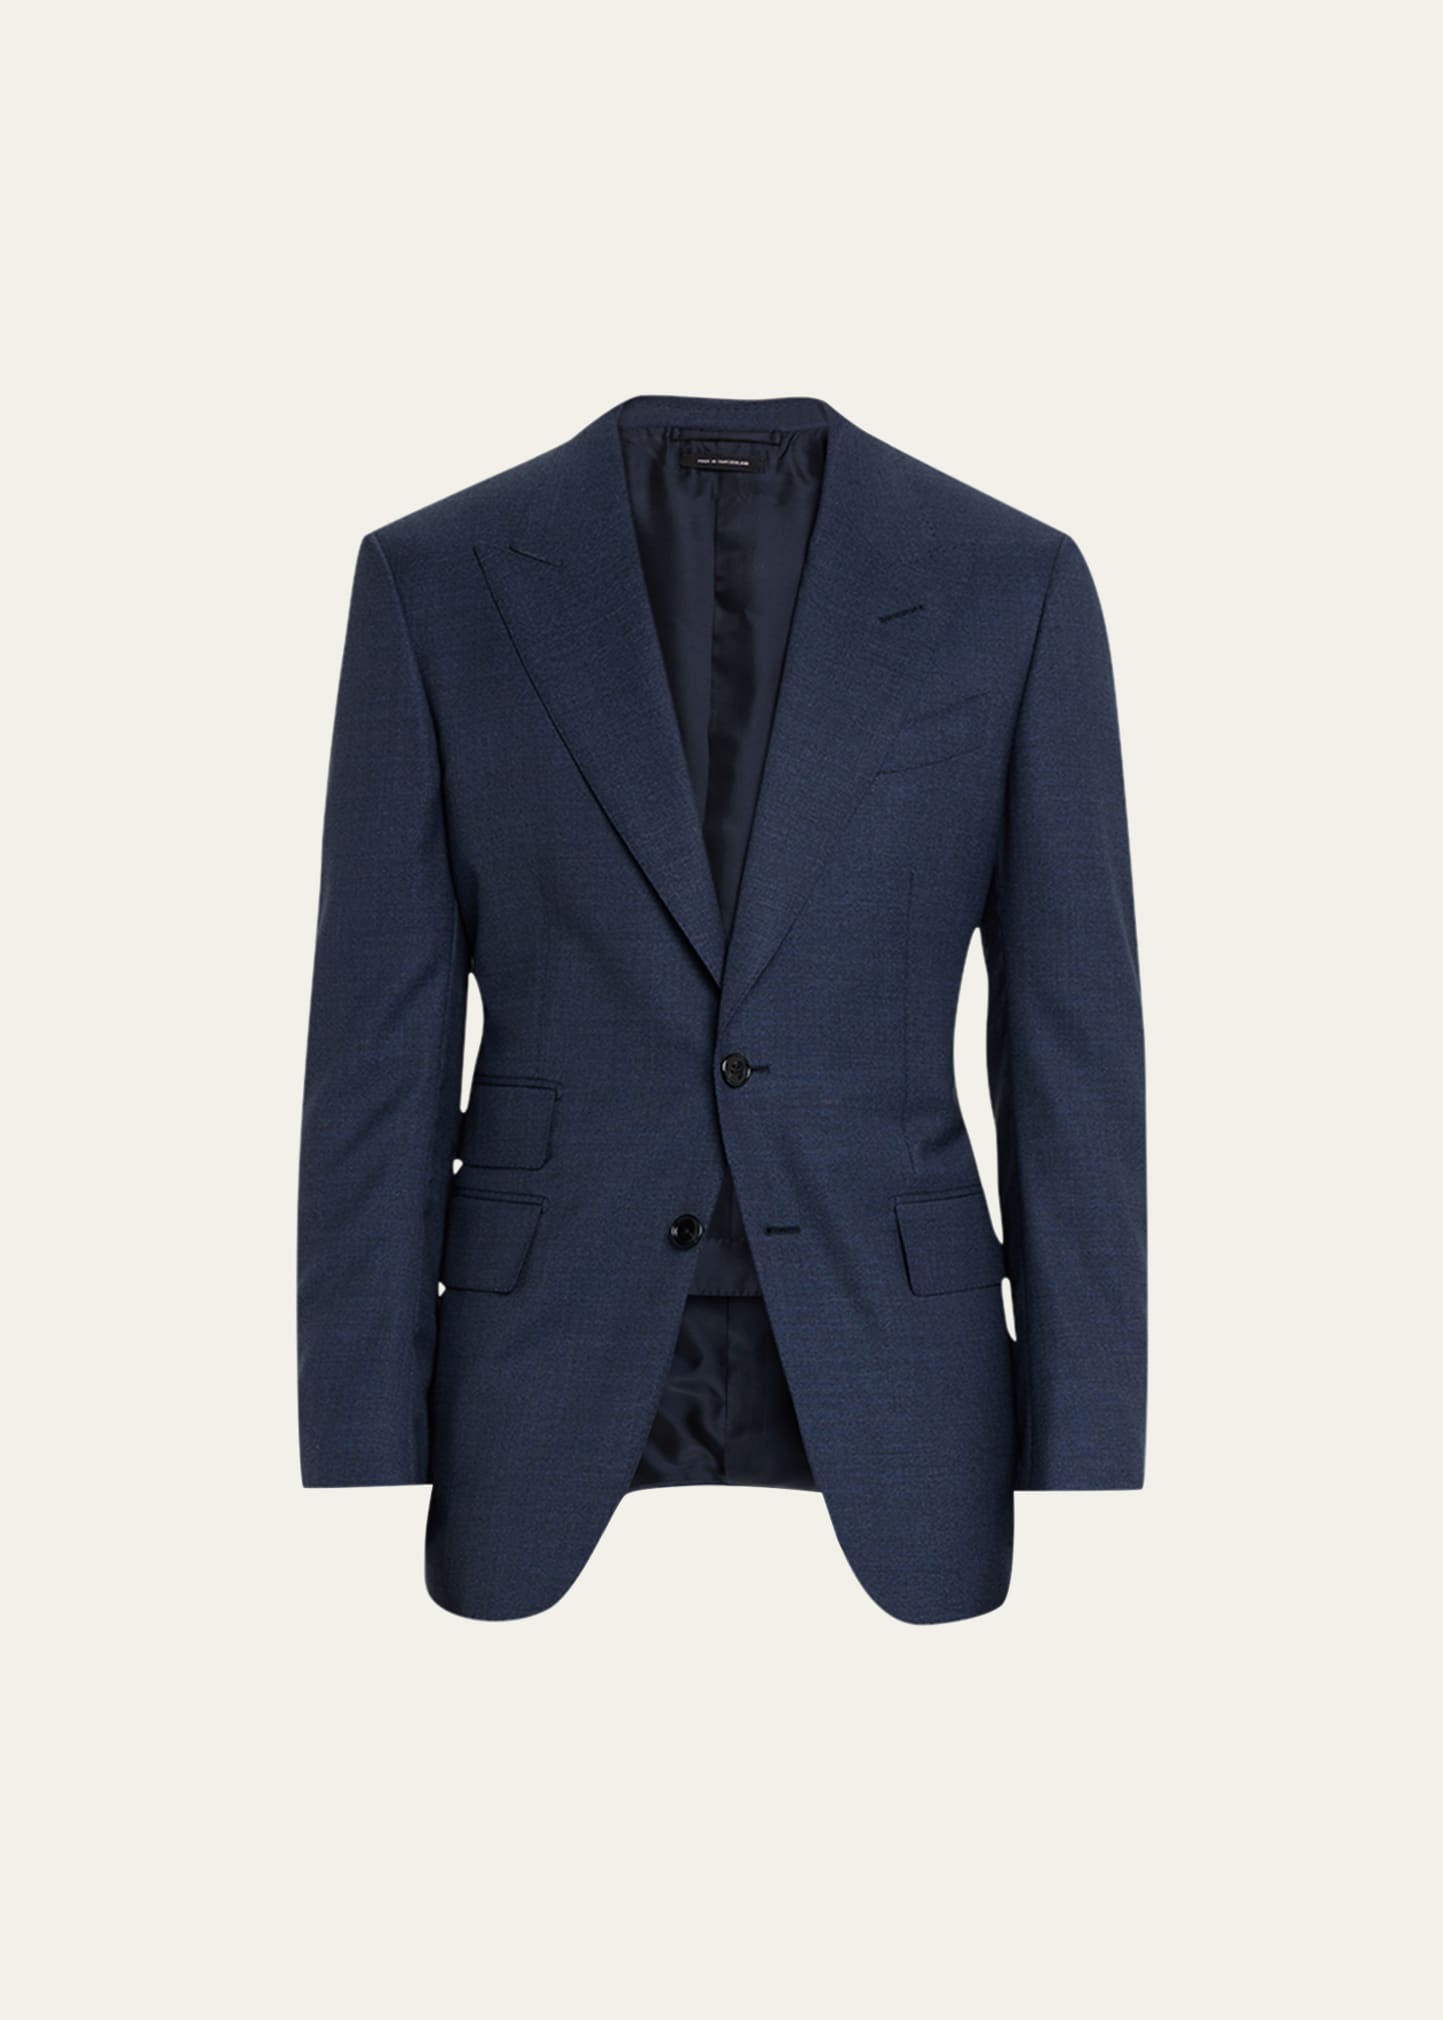 TOM FORD MEN'S MICRO MOULINE WOOL-BLEND SUIT